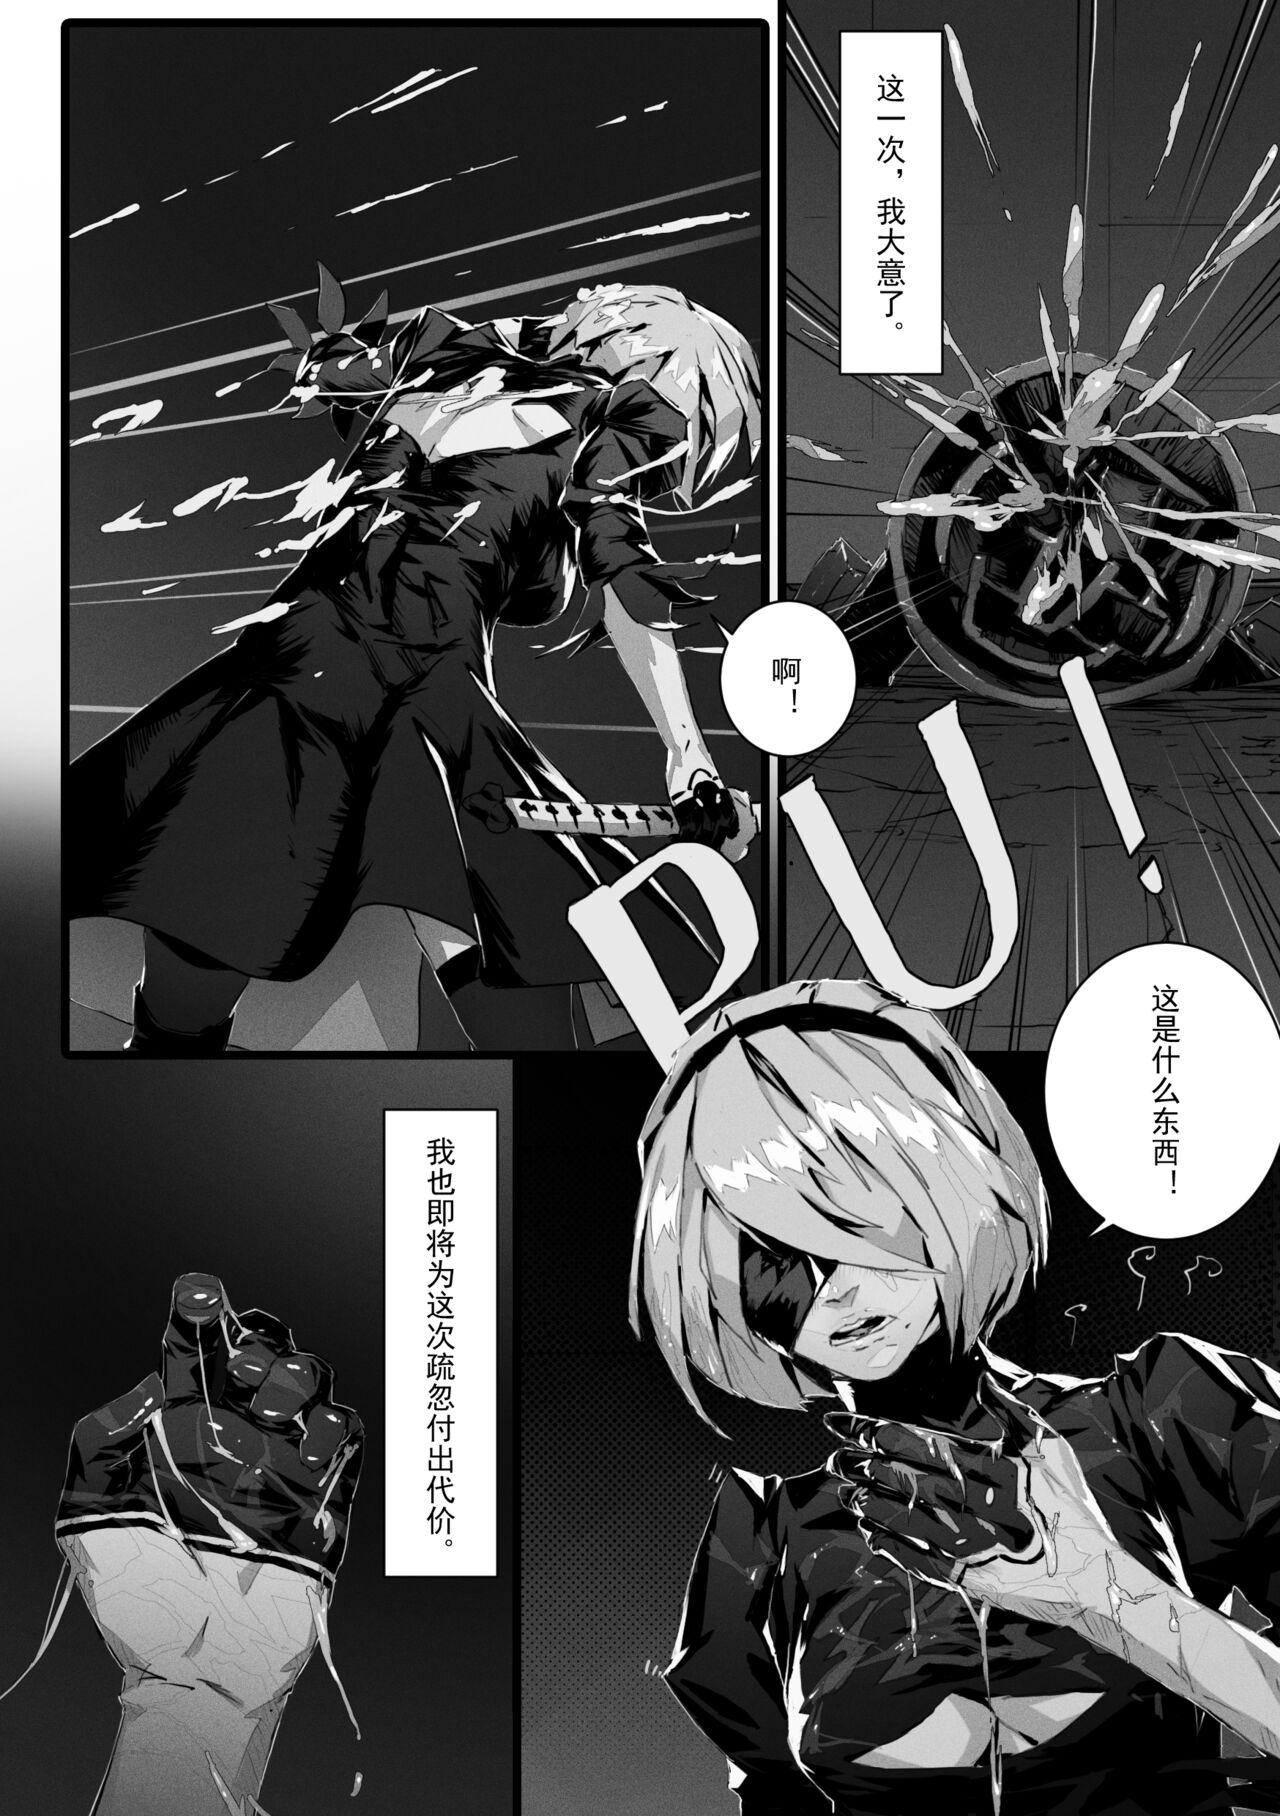  2B In Trouble Part 1-6 - Nier automata Real Amature Porn - Page 6